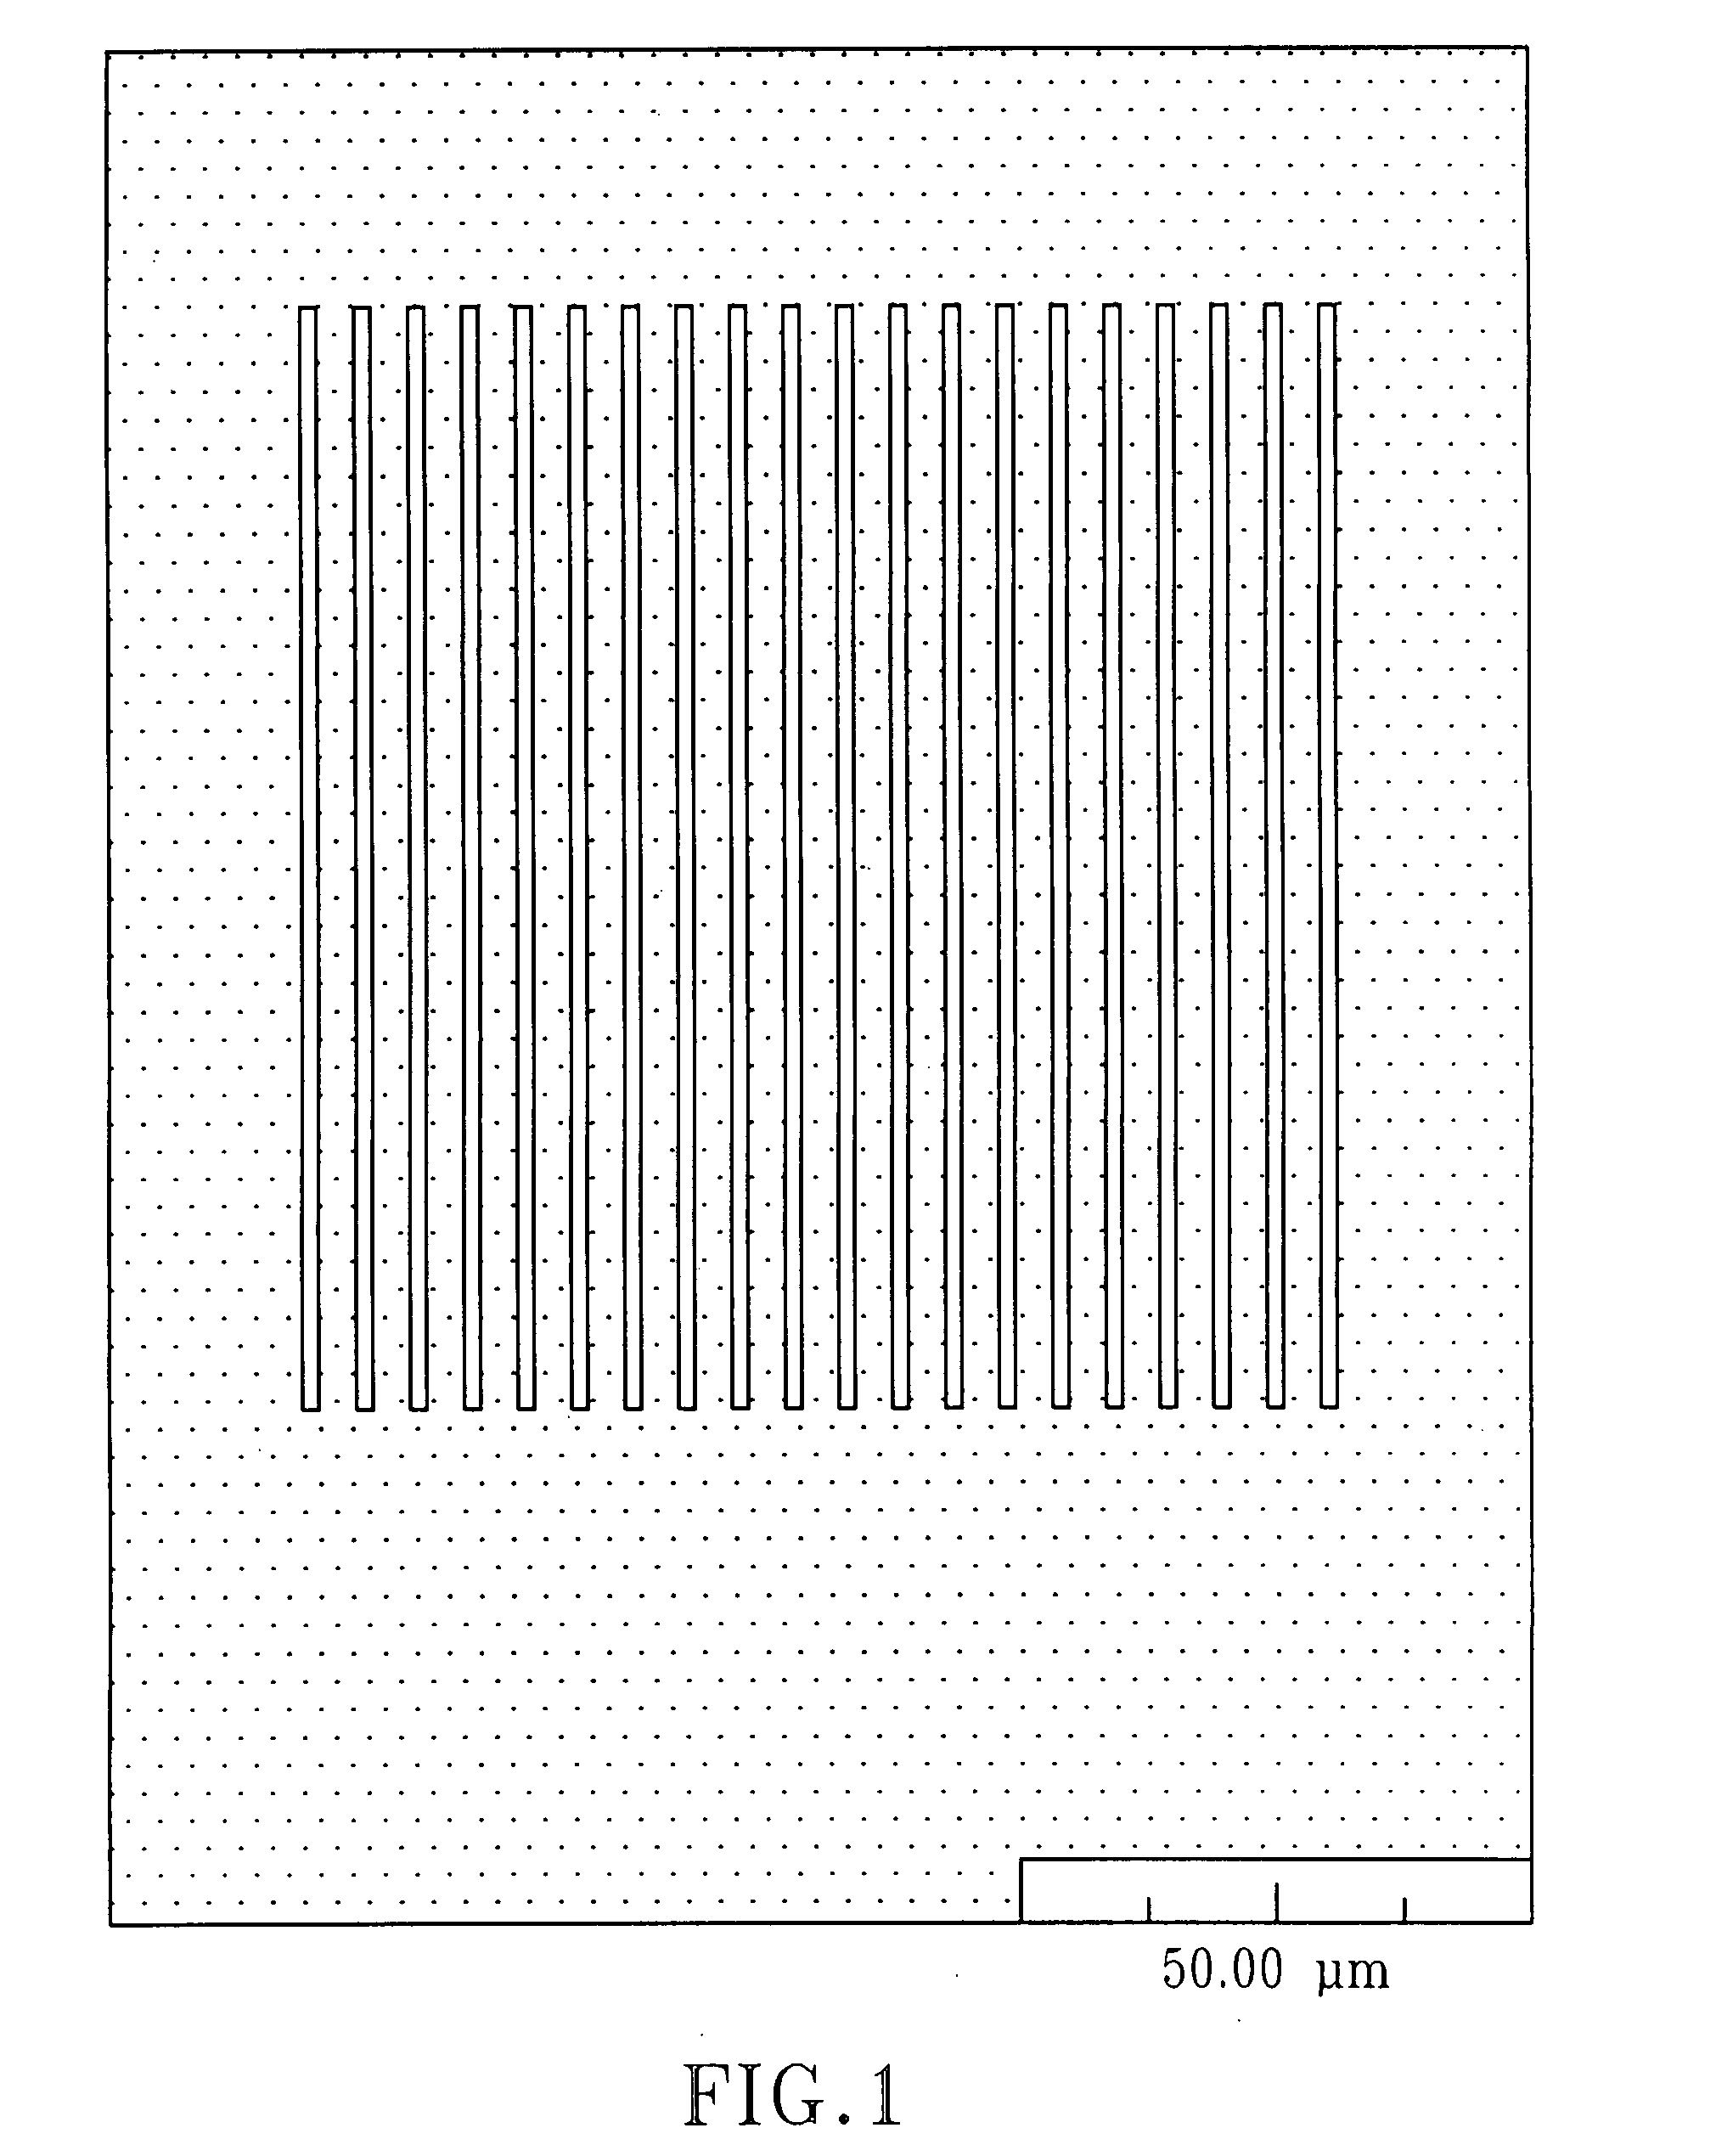 Optical Material and Method for Modifying the Refractive Index